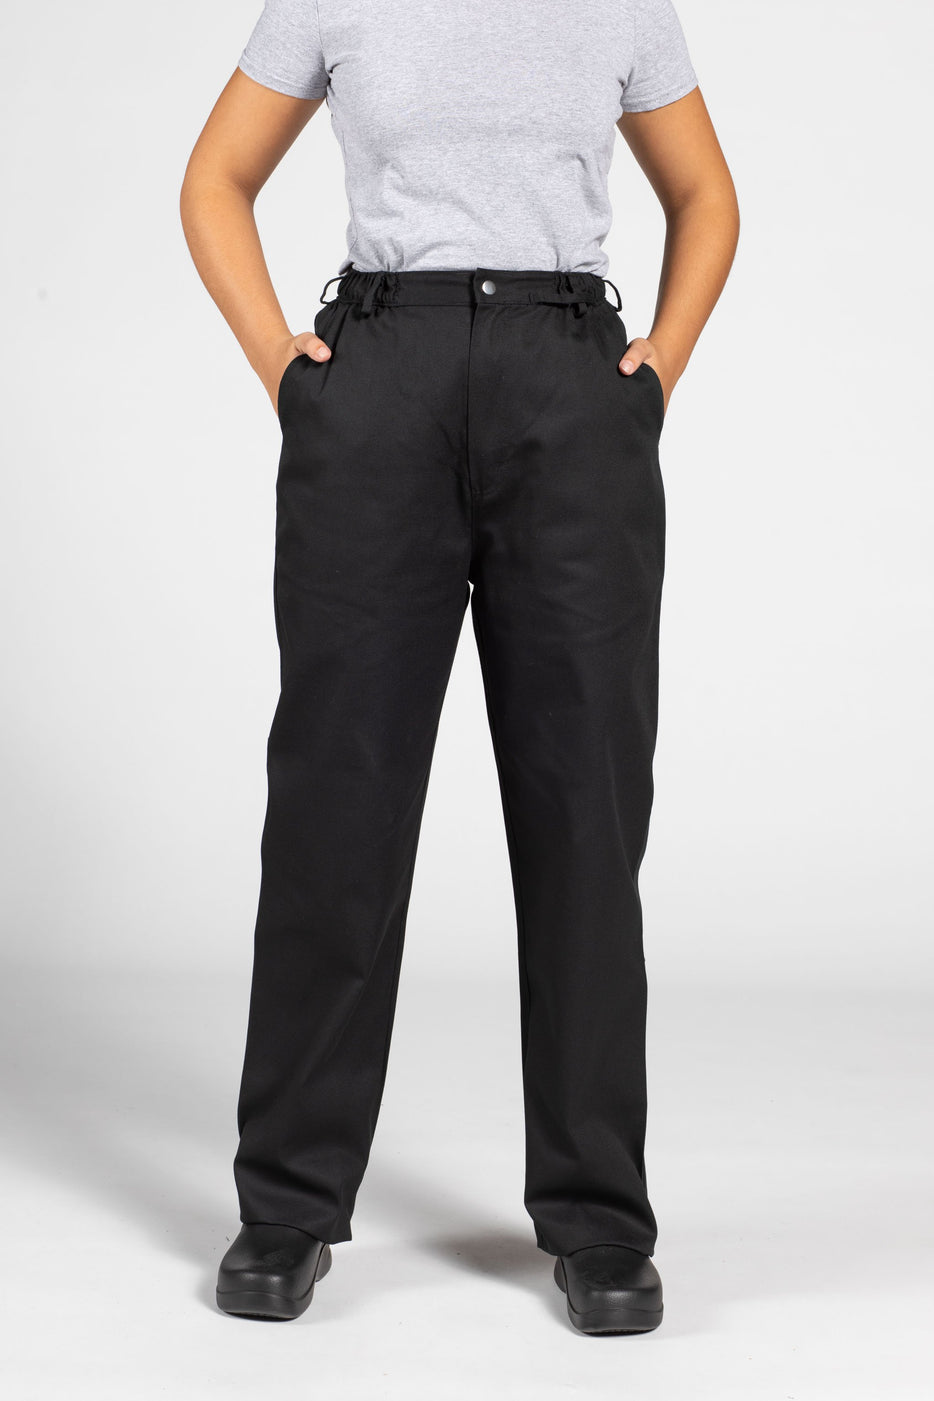 Executive Chef Pant-Uncommon Threads